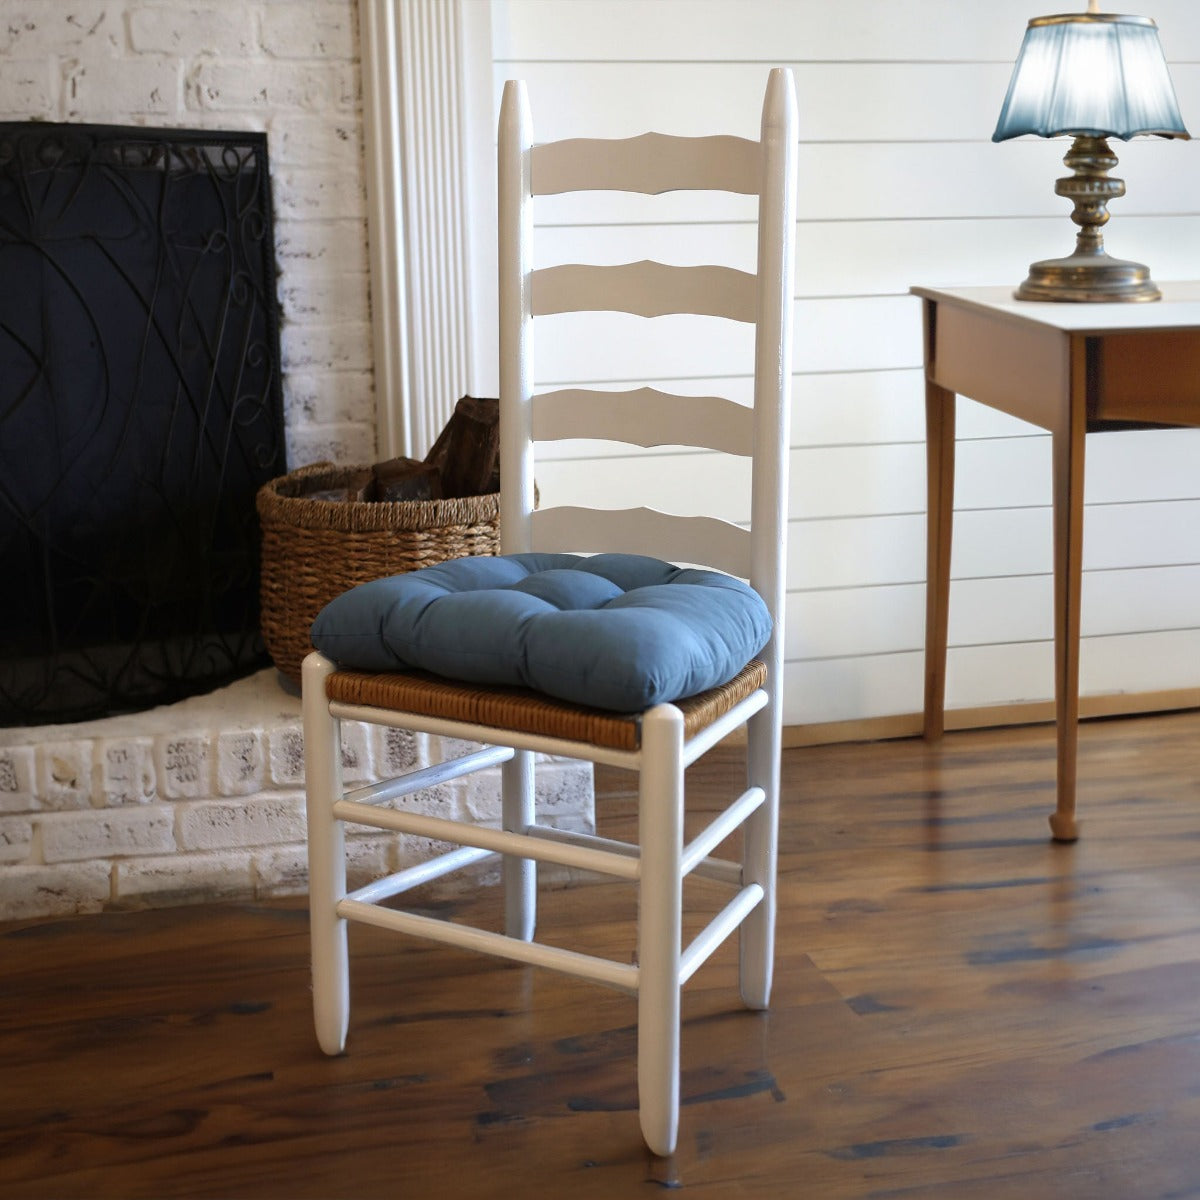 federal blue chair pad on ladderback dining chair with cane seat in farmhouse dining room with shiplap